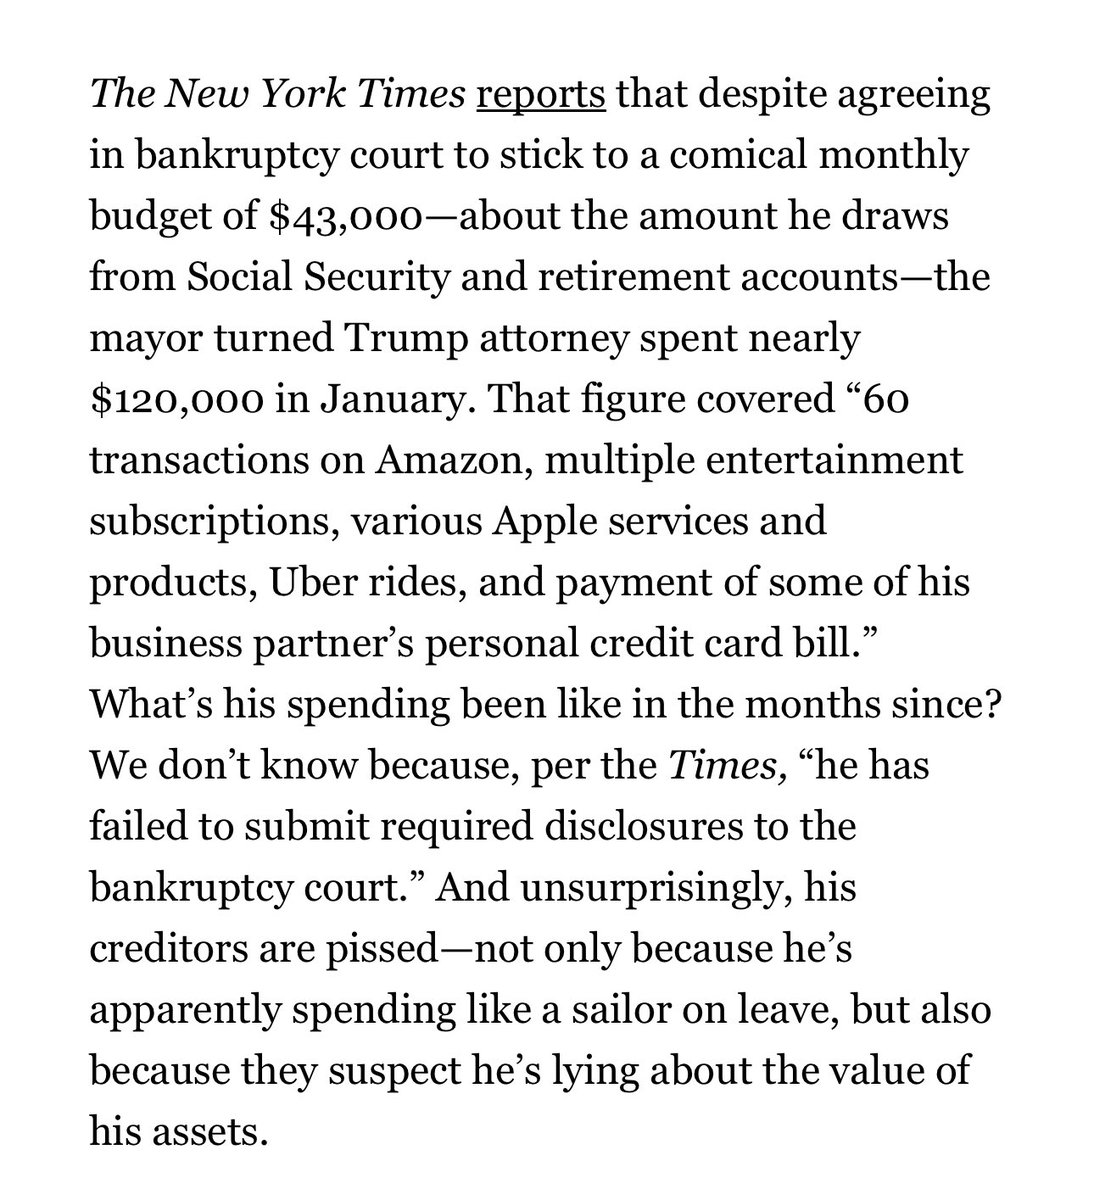 Rudy Colludy defamed Ruby Freeman and Shaye Moss, they sued & were awarded 150 million. Rudy filed bankruptcy. He says he can barely make it living on a $43,000 a MONTH budget. Many Americans don’t make that in a year!